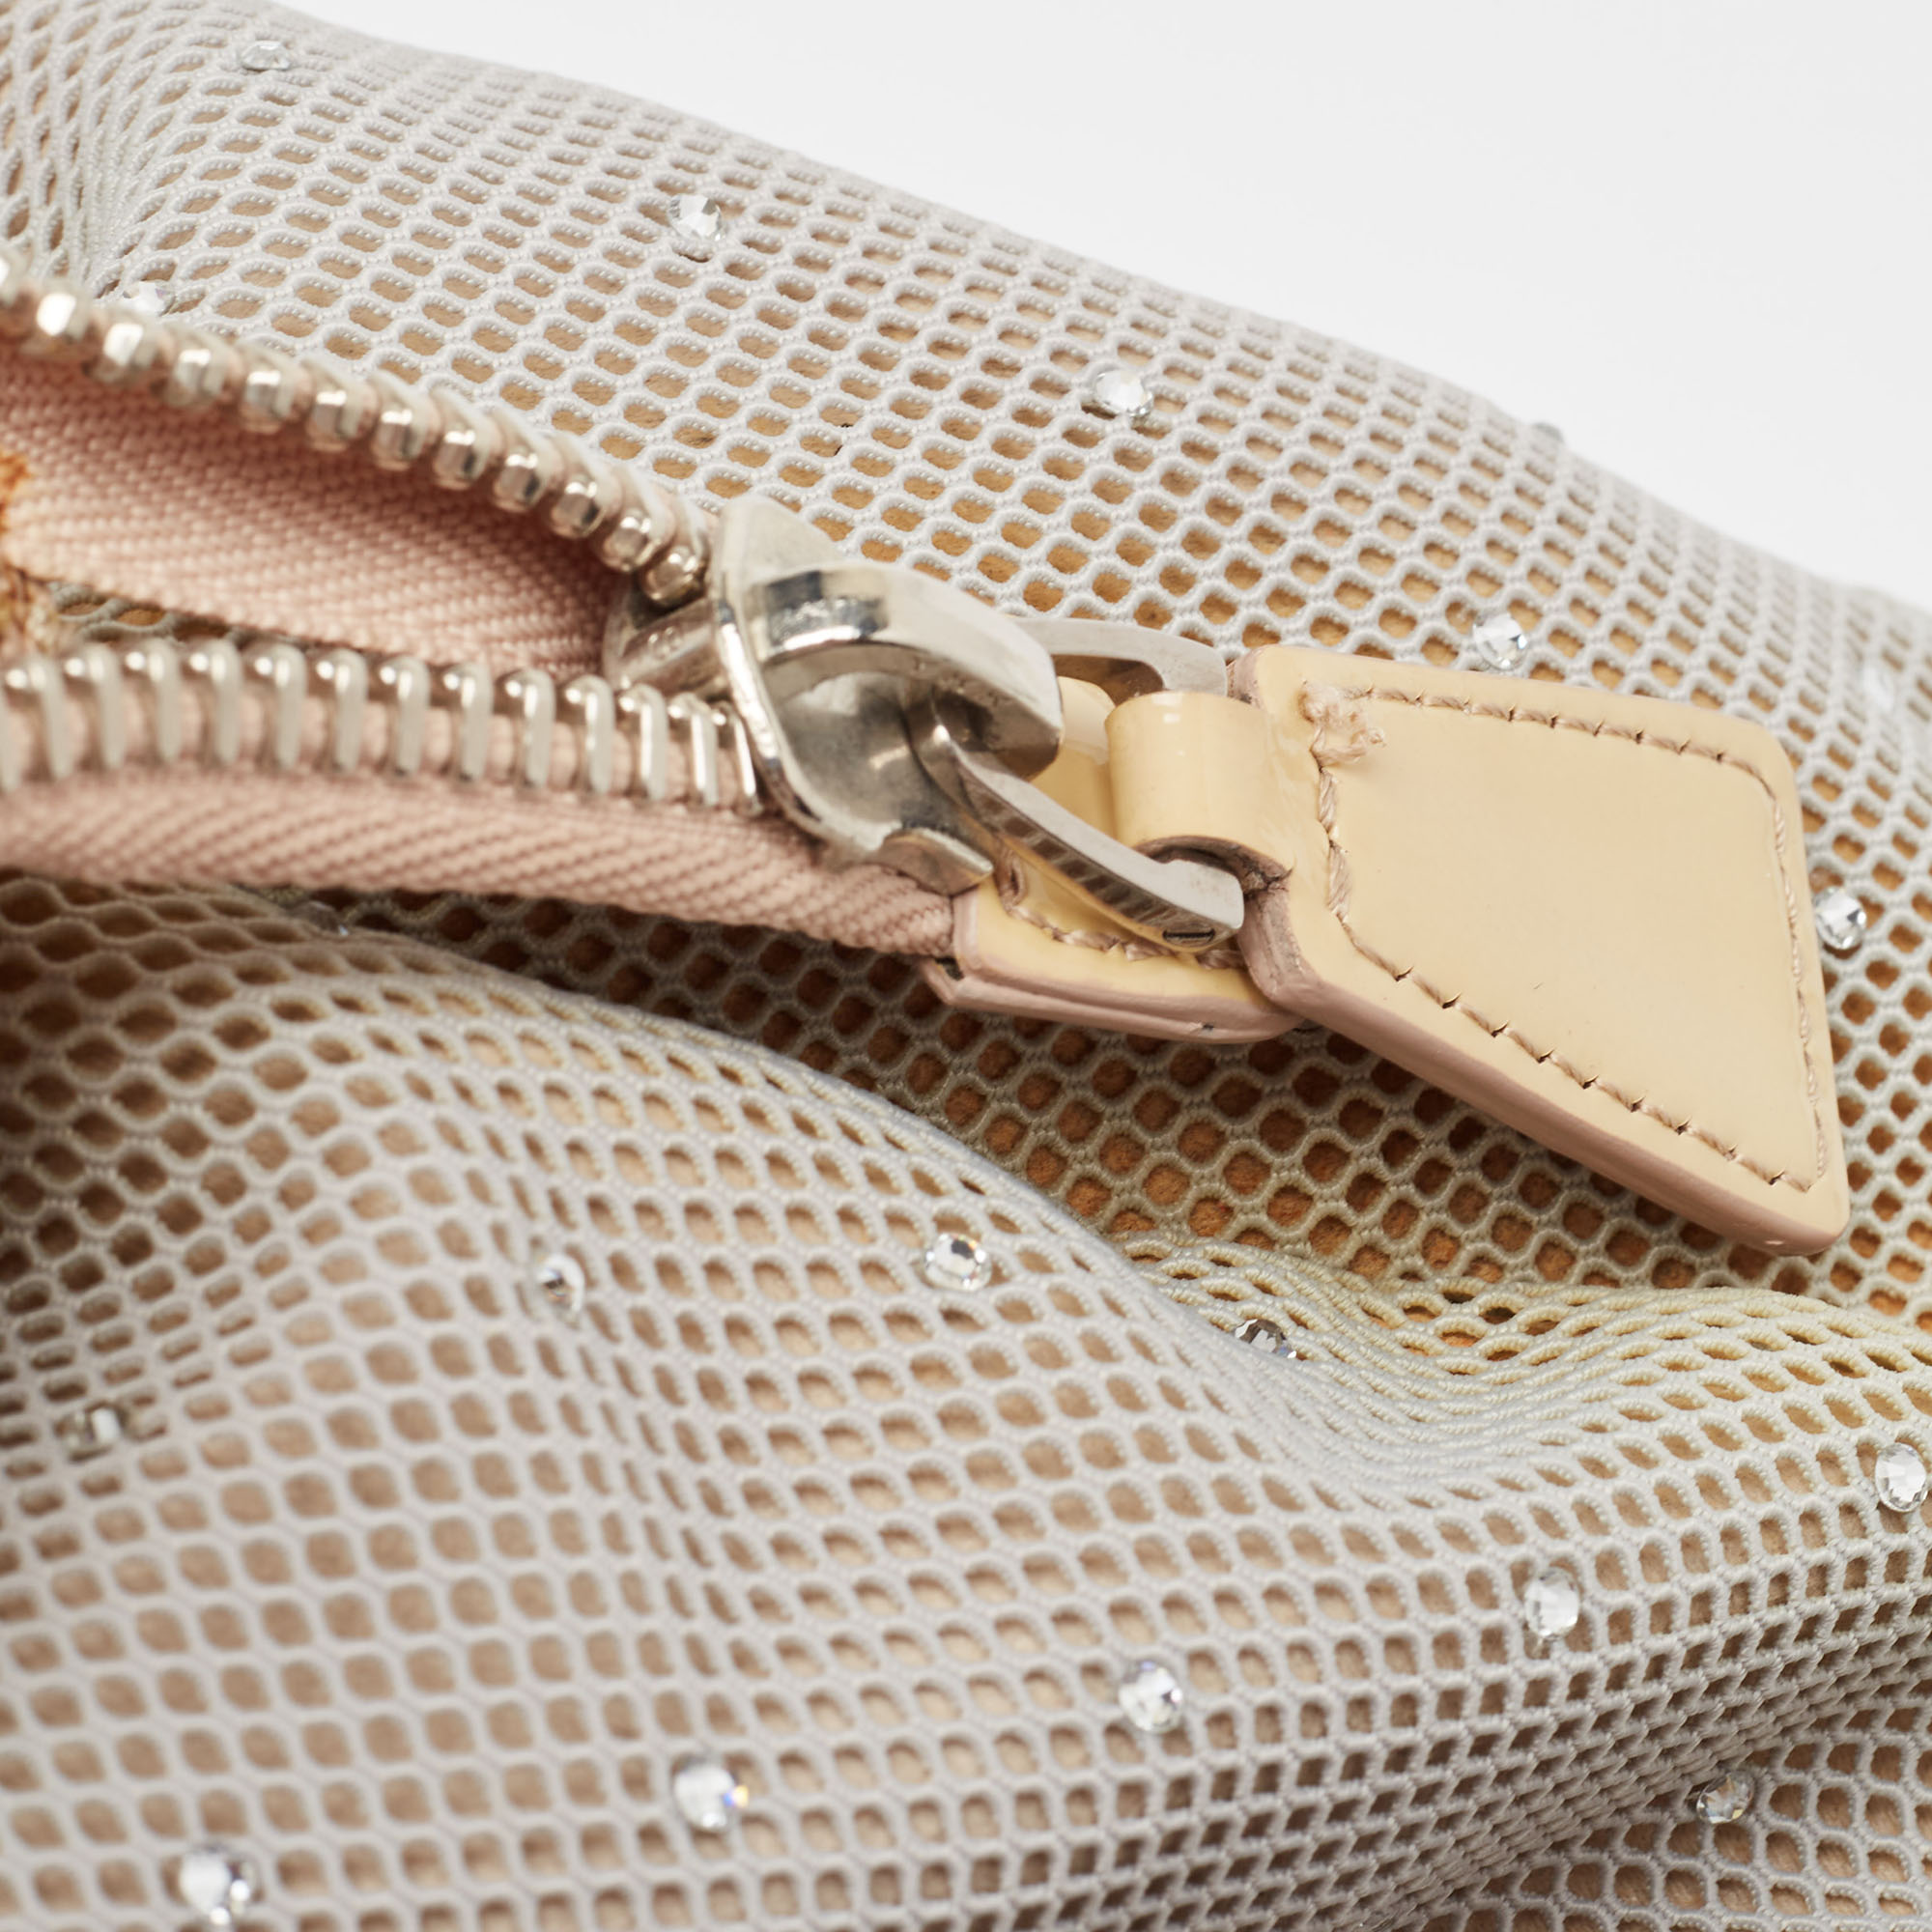 Emporio Armani Grey/Beige Mesh And Patent Leather Crystal Embellished Clutch